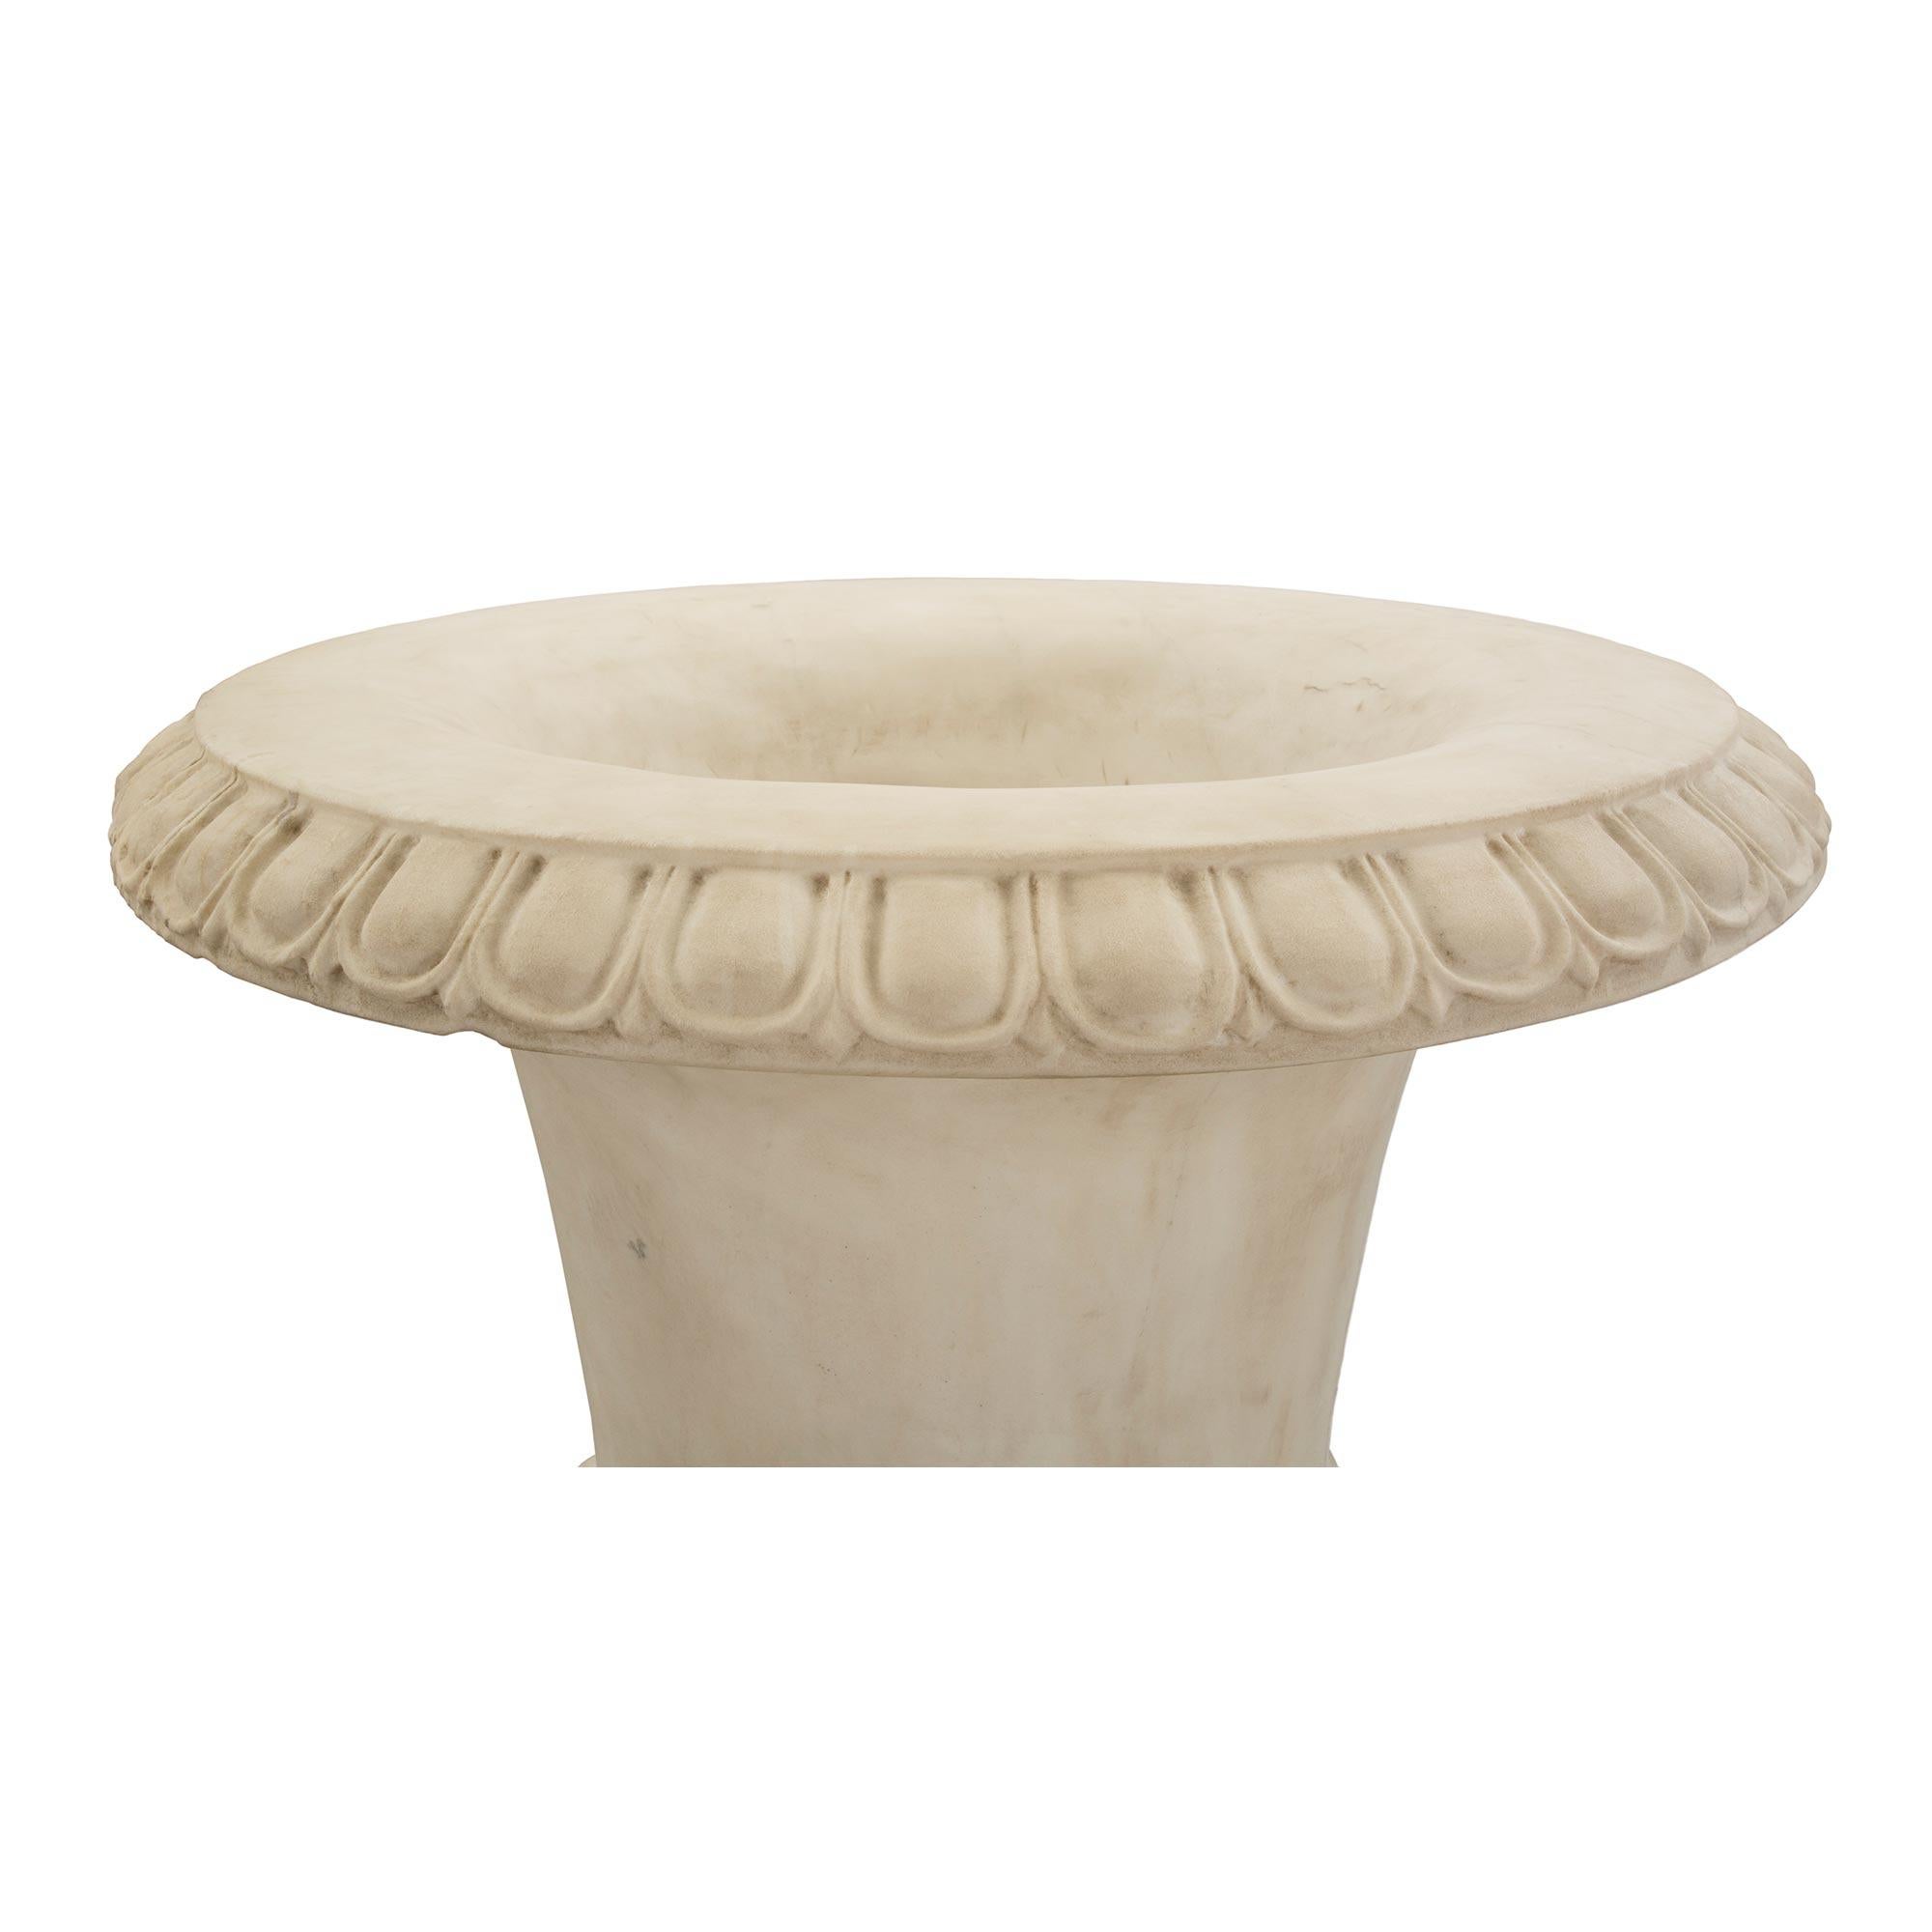 Pair of Italian 19th Century Large Scale White Carrara Marble Urns In Good Condition For Sale In West Palm Beach, FL